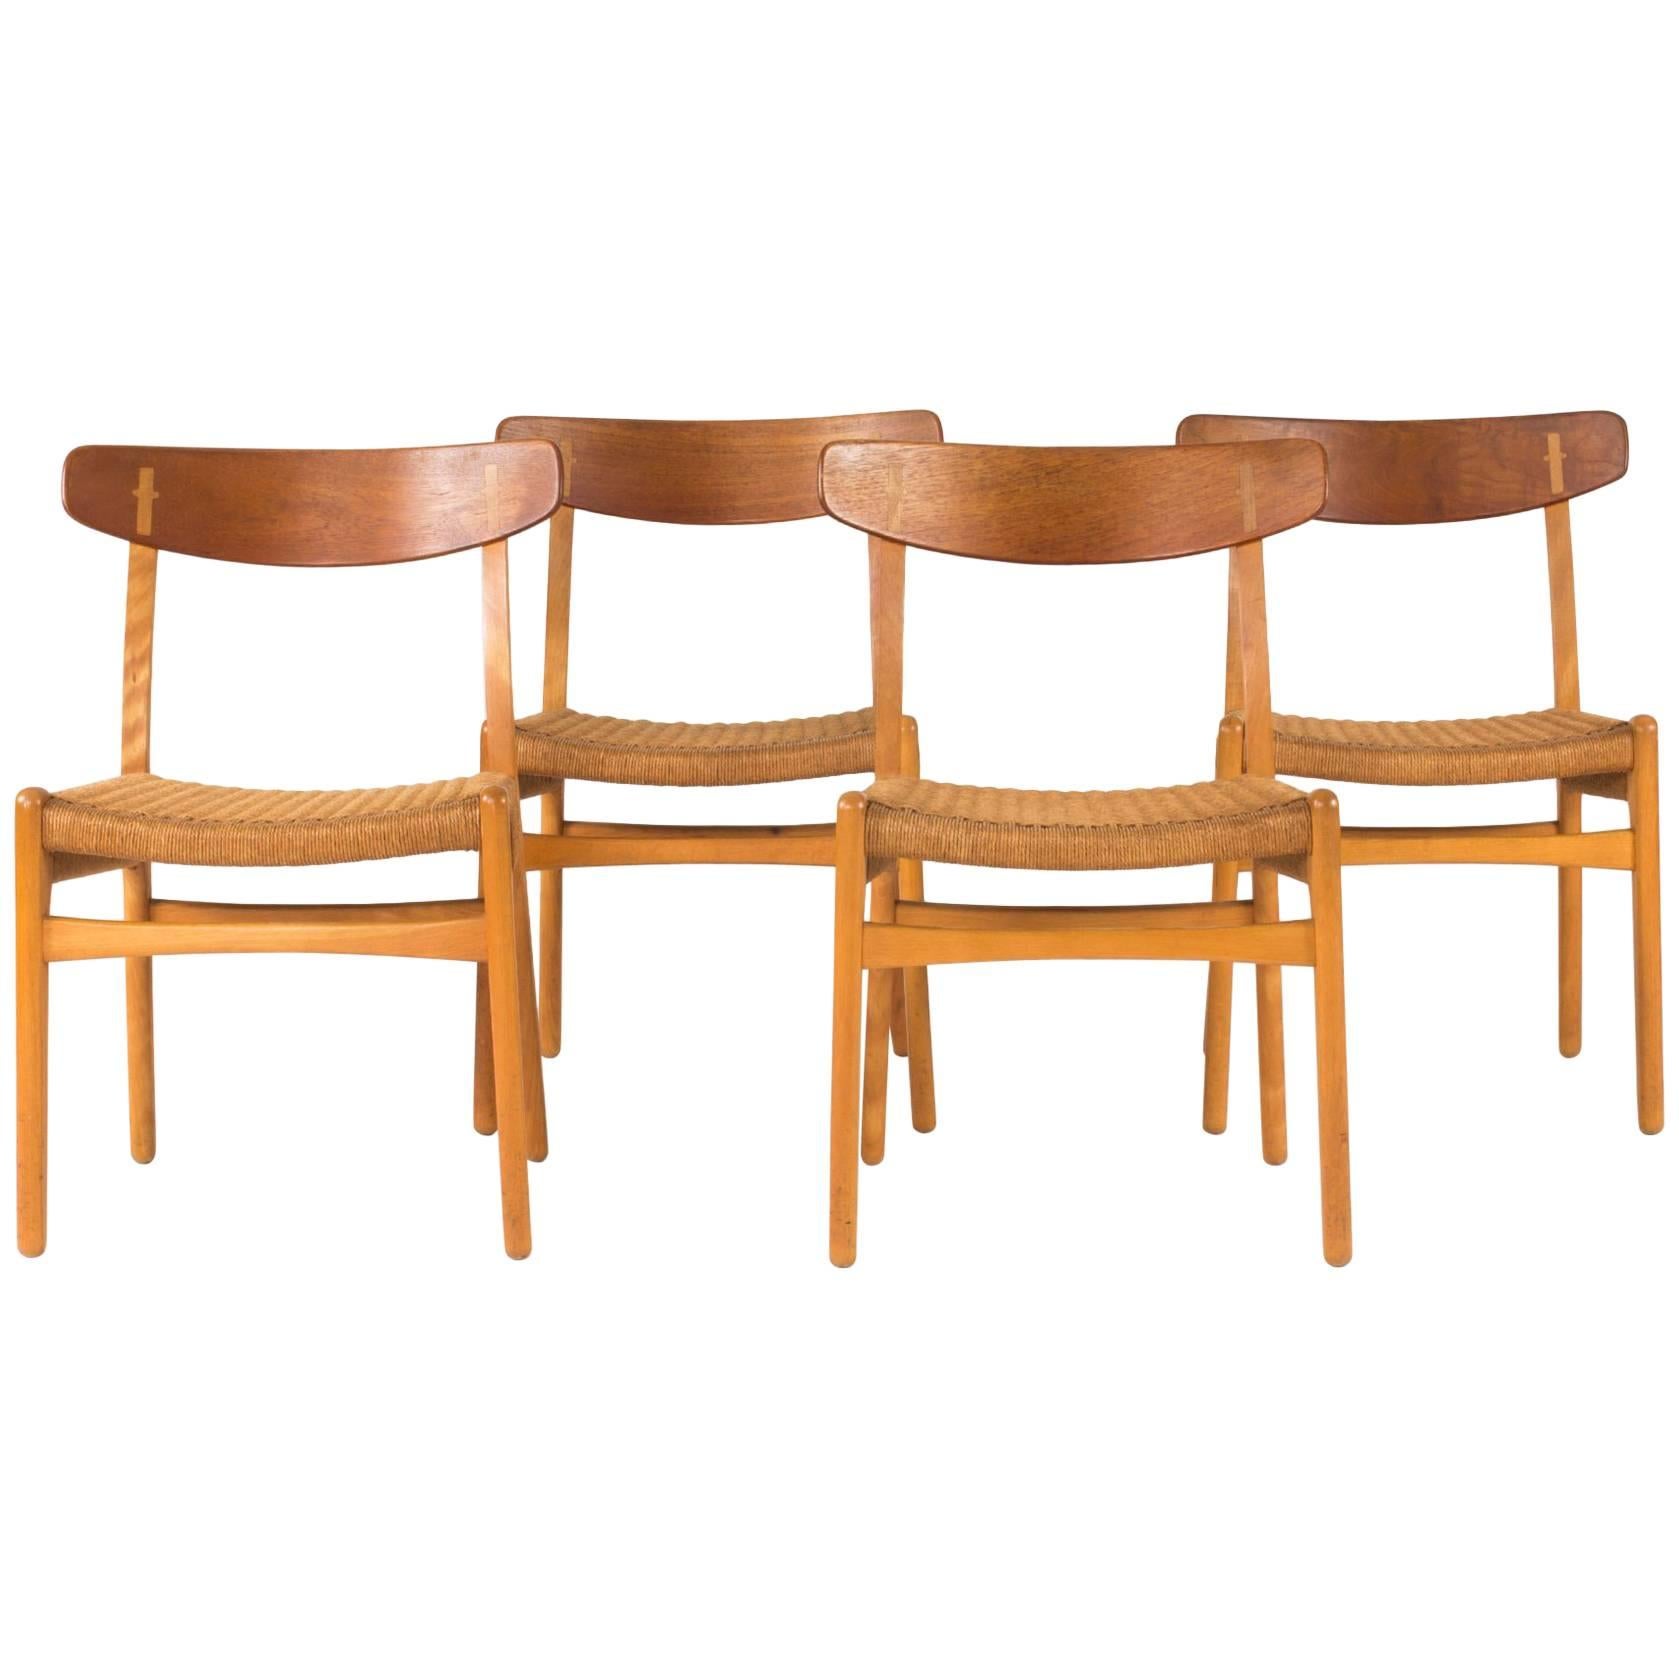 Set of Four "CH 23" Dining Chairs by Hans J. Wegner